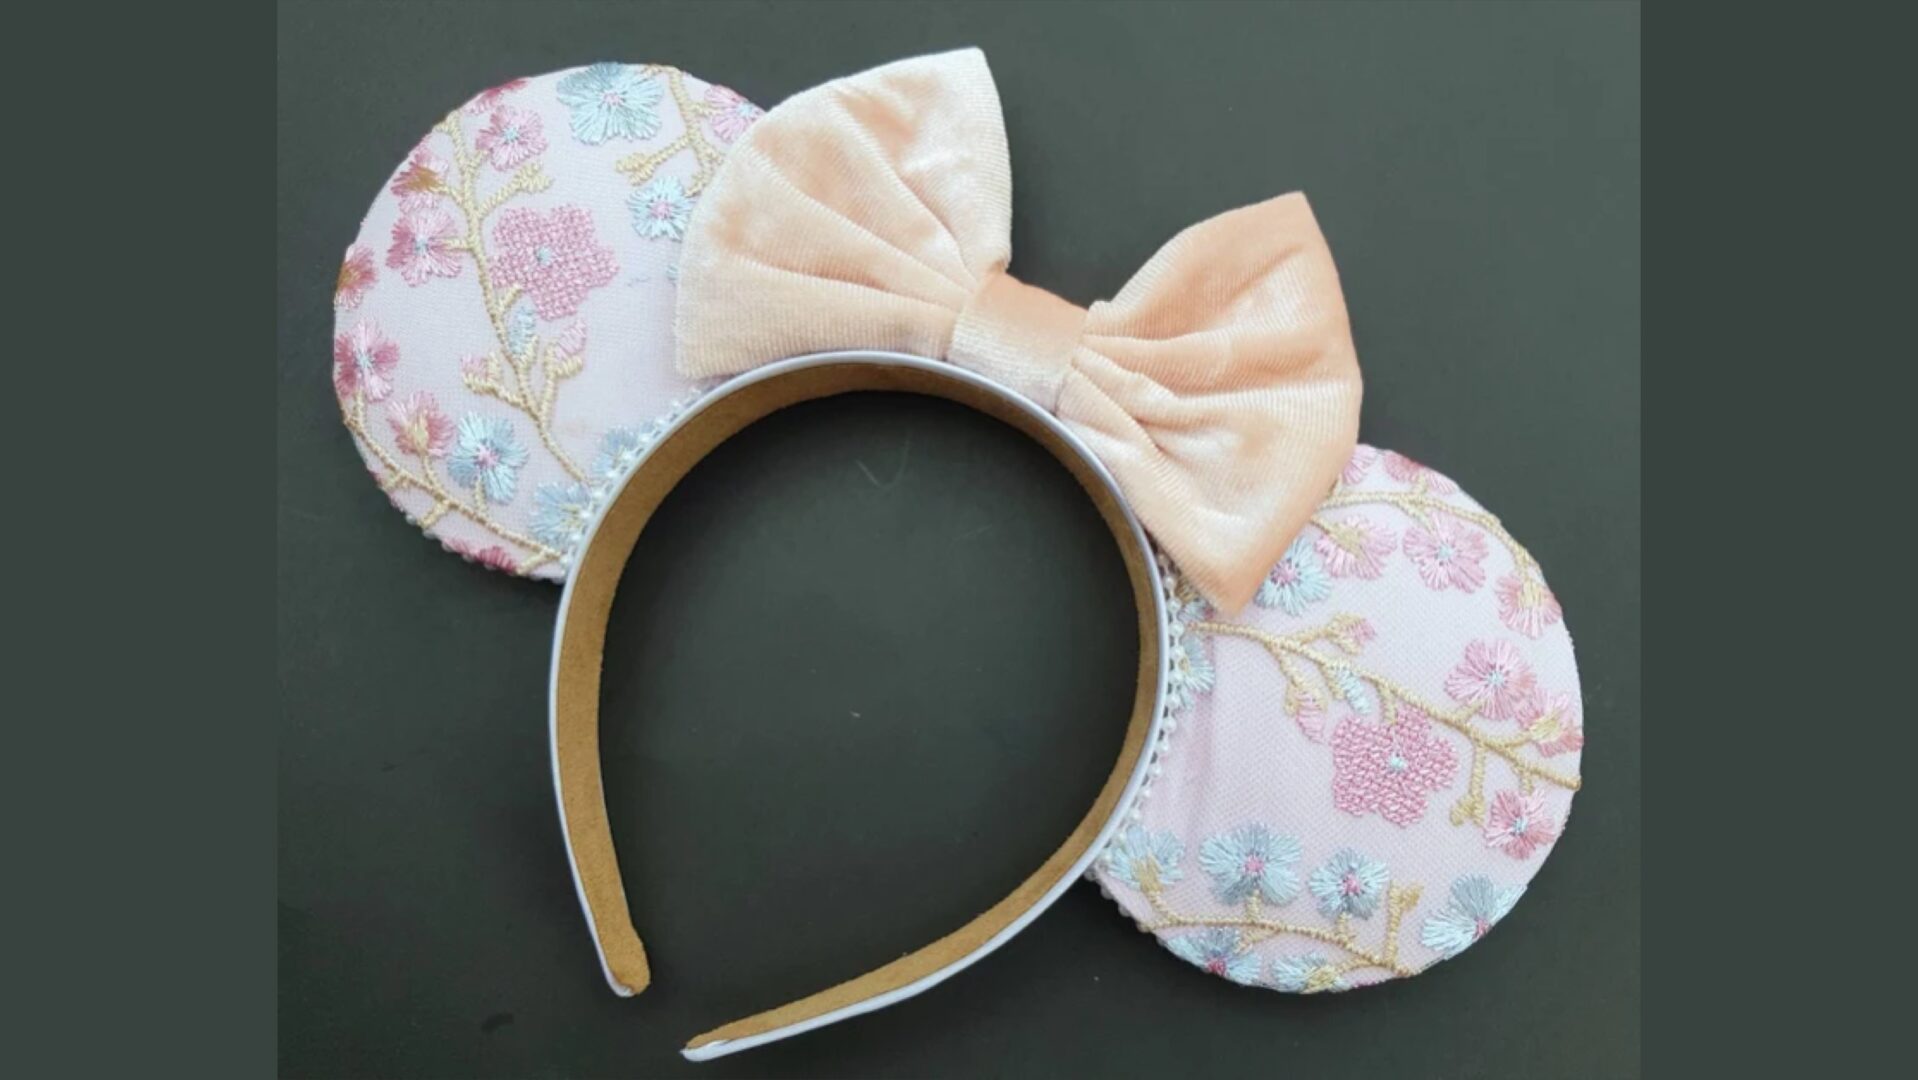 Pink Floral Embroidered Minnie Ears For Your Next Visit To Epcot Flower & Garden Festival!